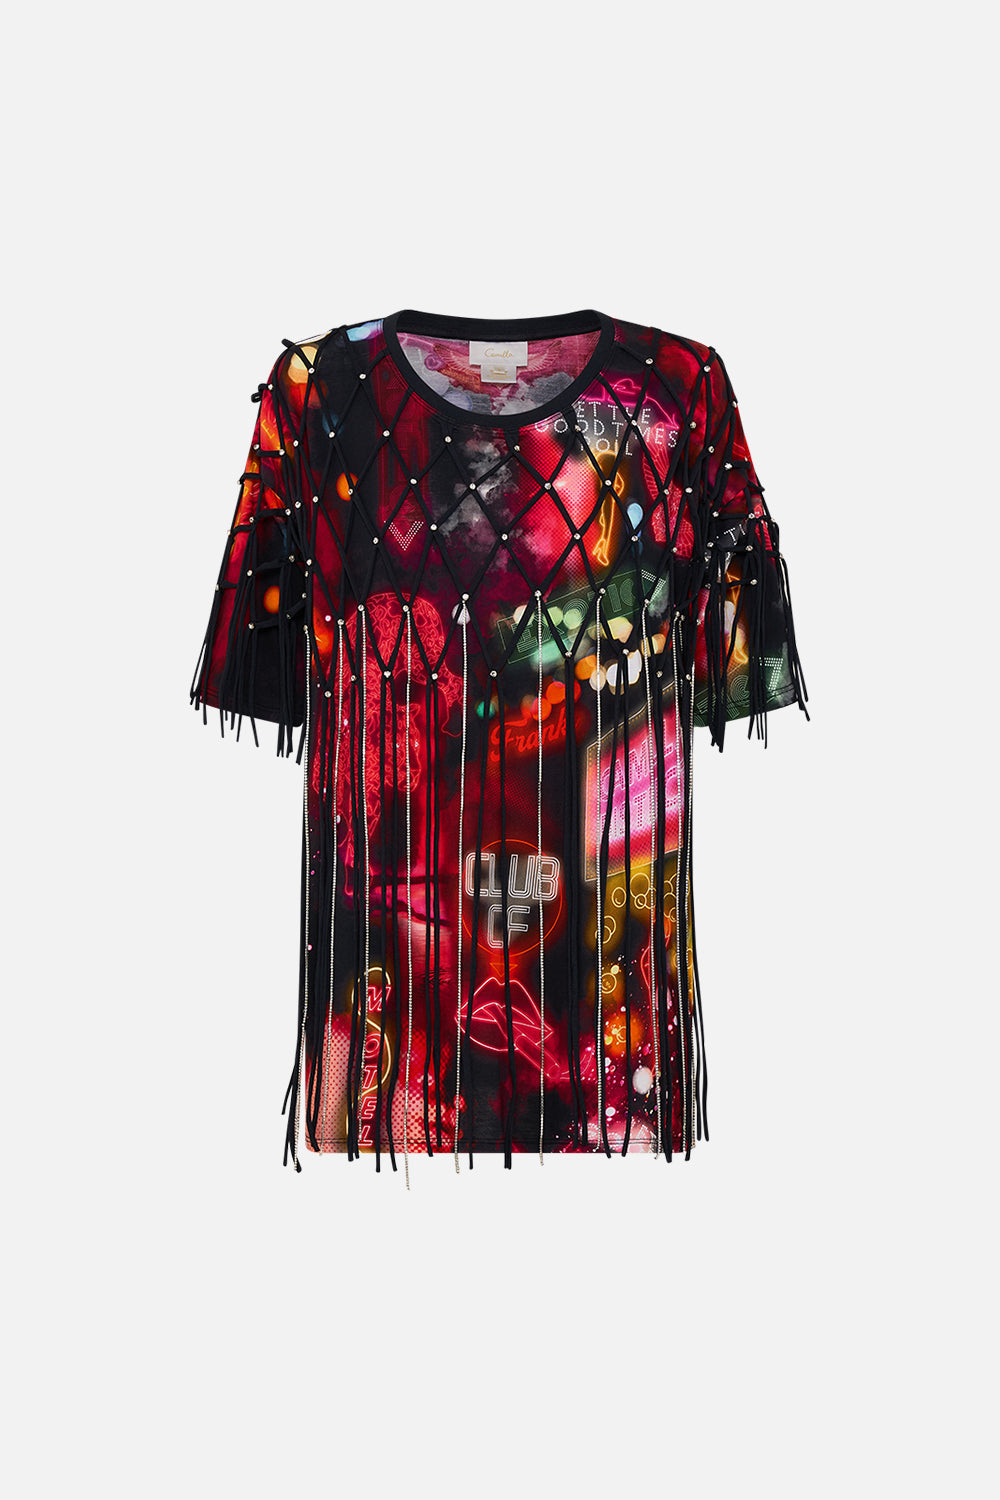 CAMILLA black oversized band tee with embellished overlay in Electric Loveland print.